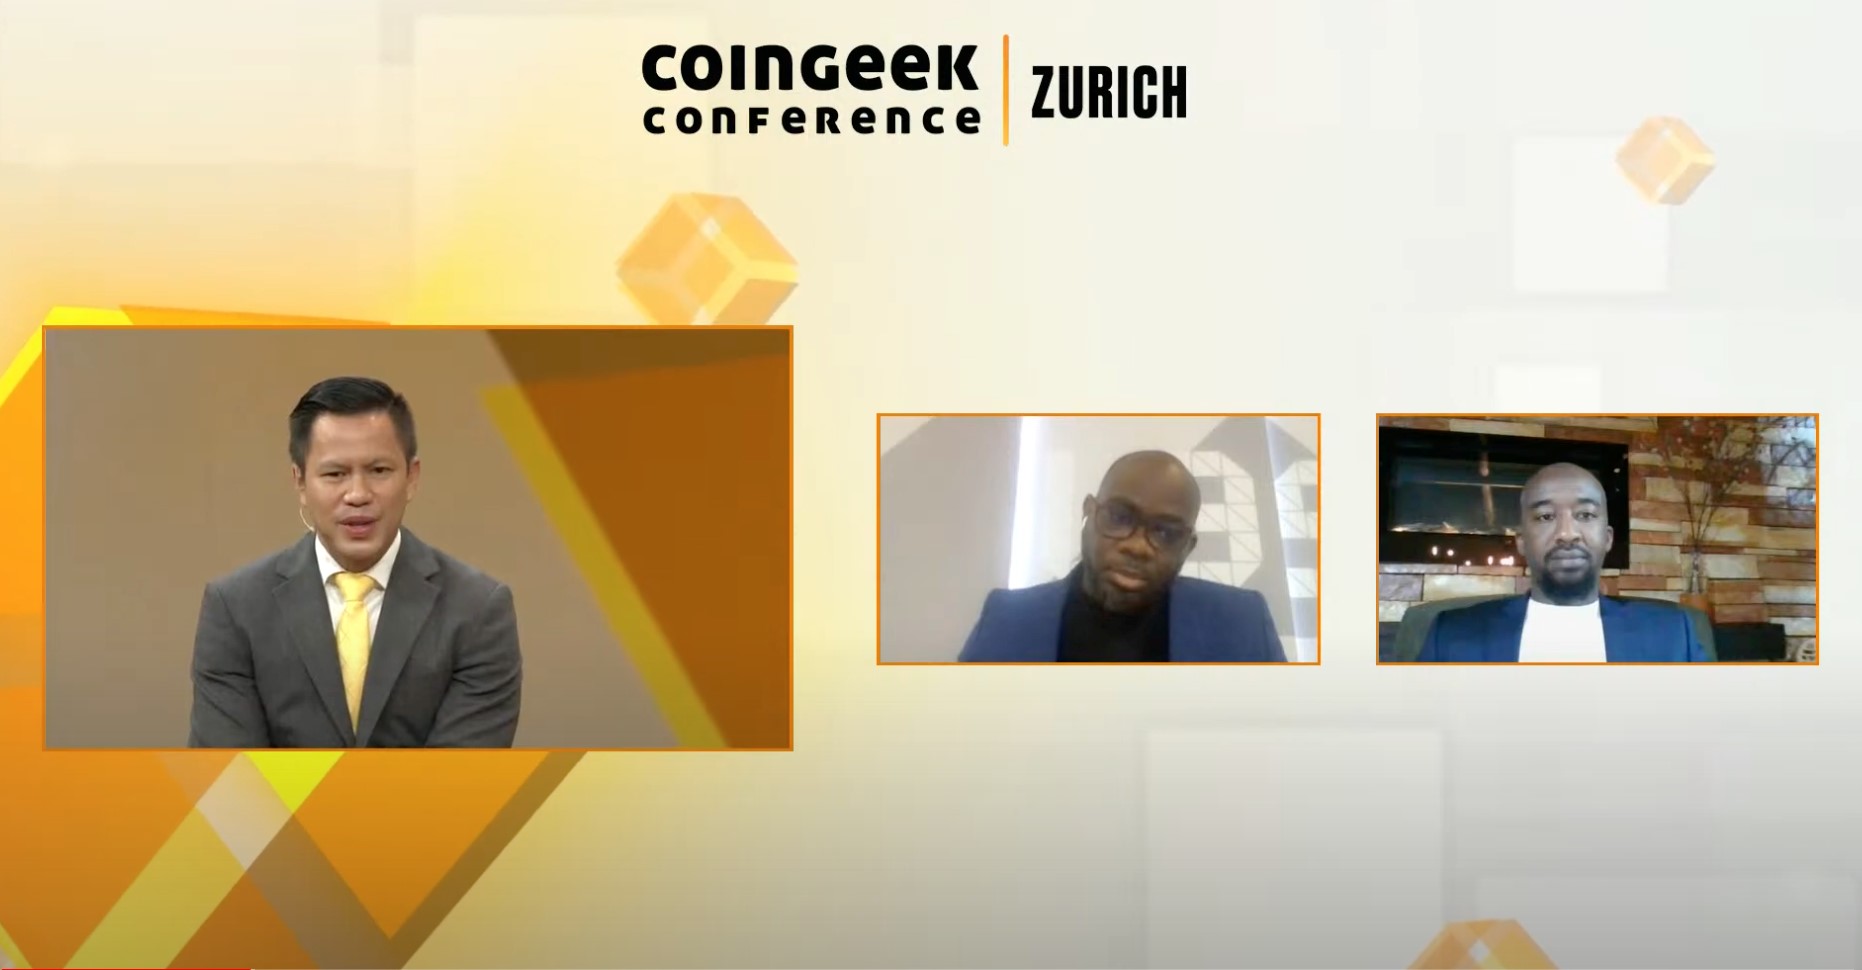 CoinGeek Zurich: BSV blockchain for eGovernment and public sector applications